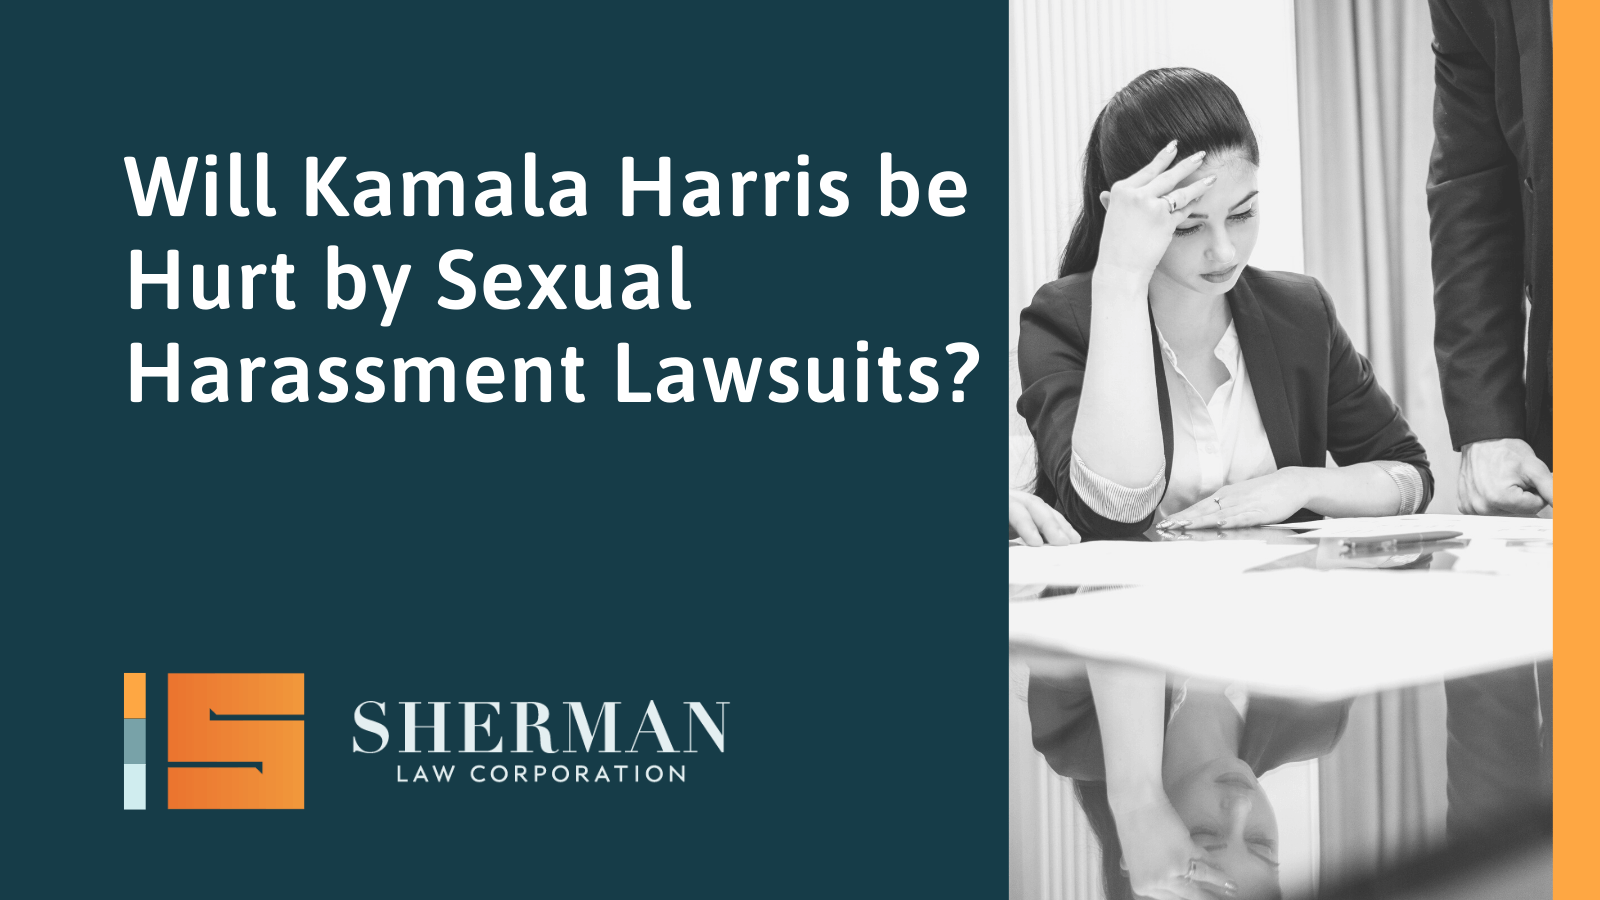 Will Kamala Harris be Hurt by Sexual Harassment Lawsuits? - california employment lawyer - sherman law corporation